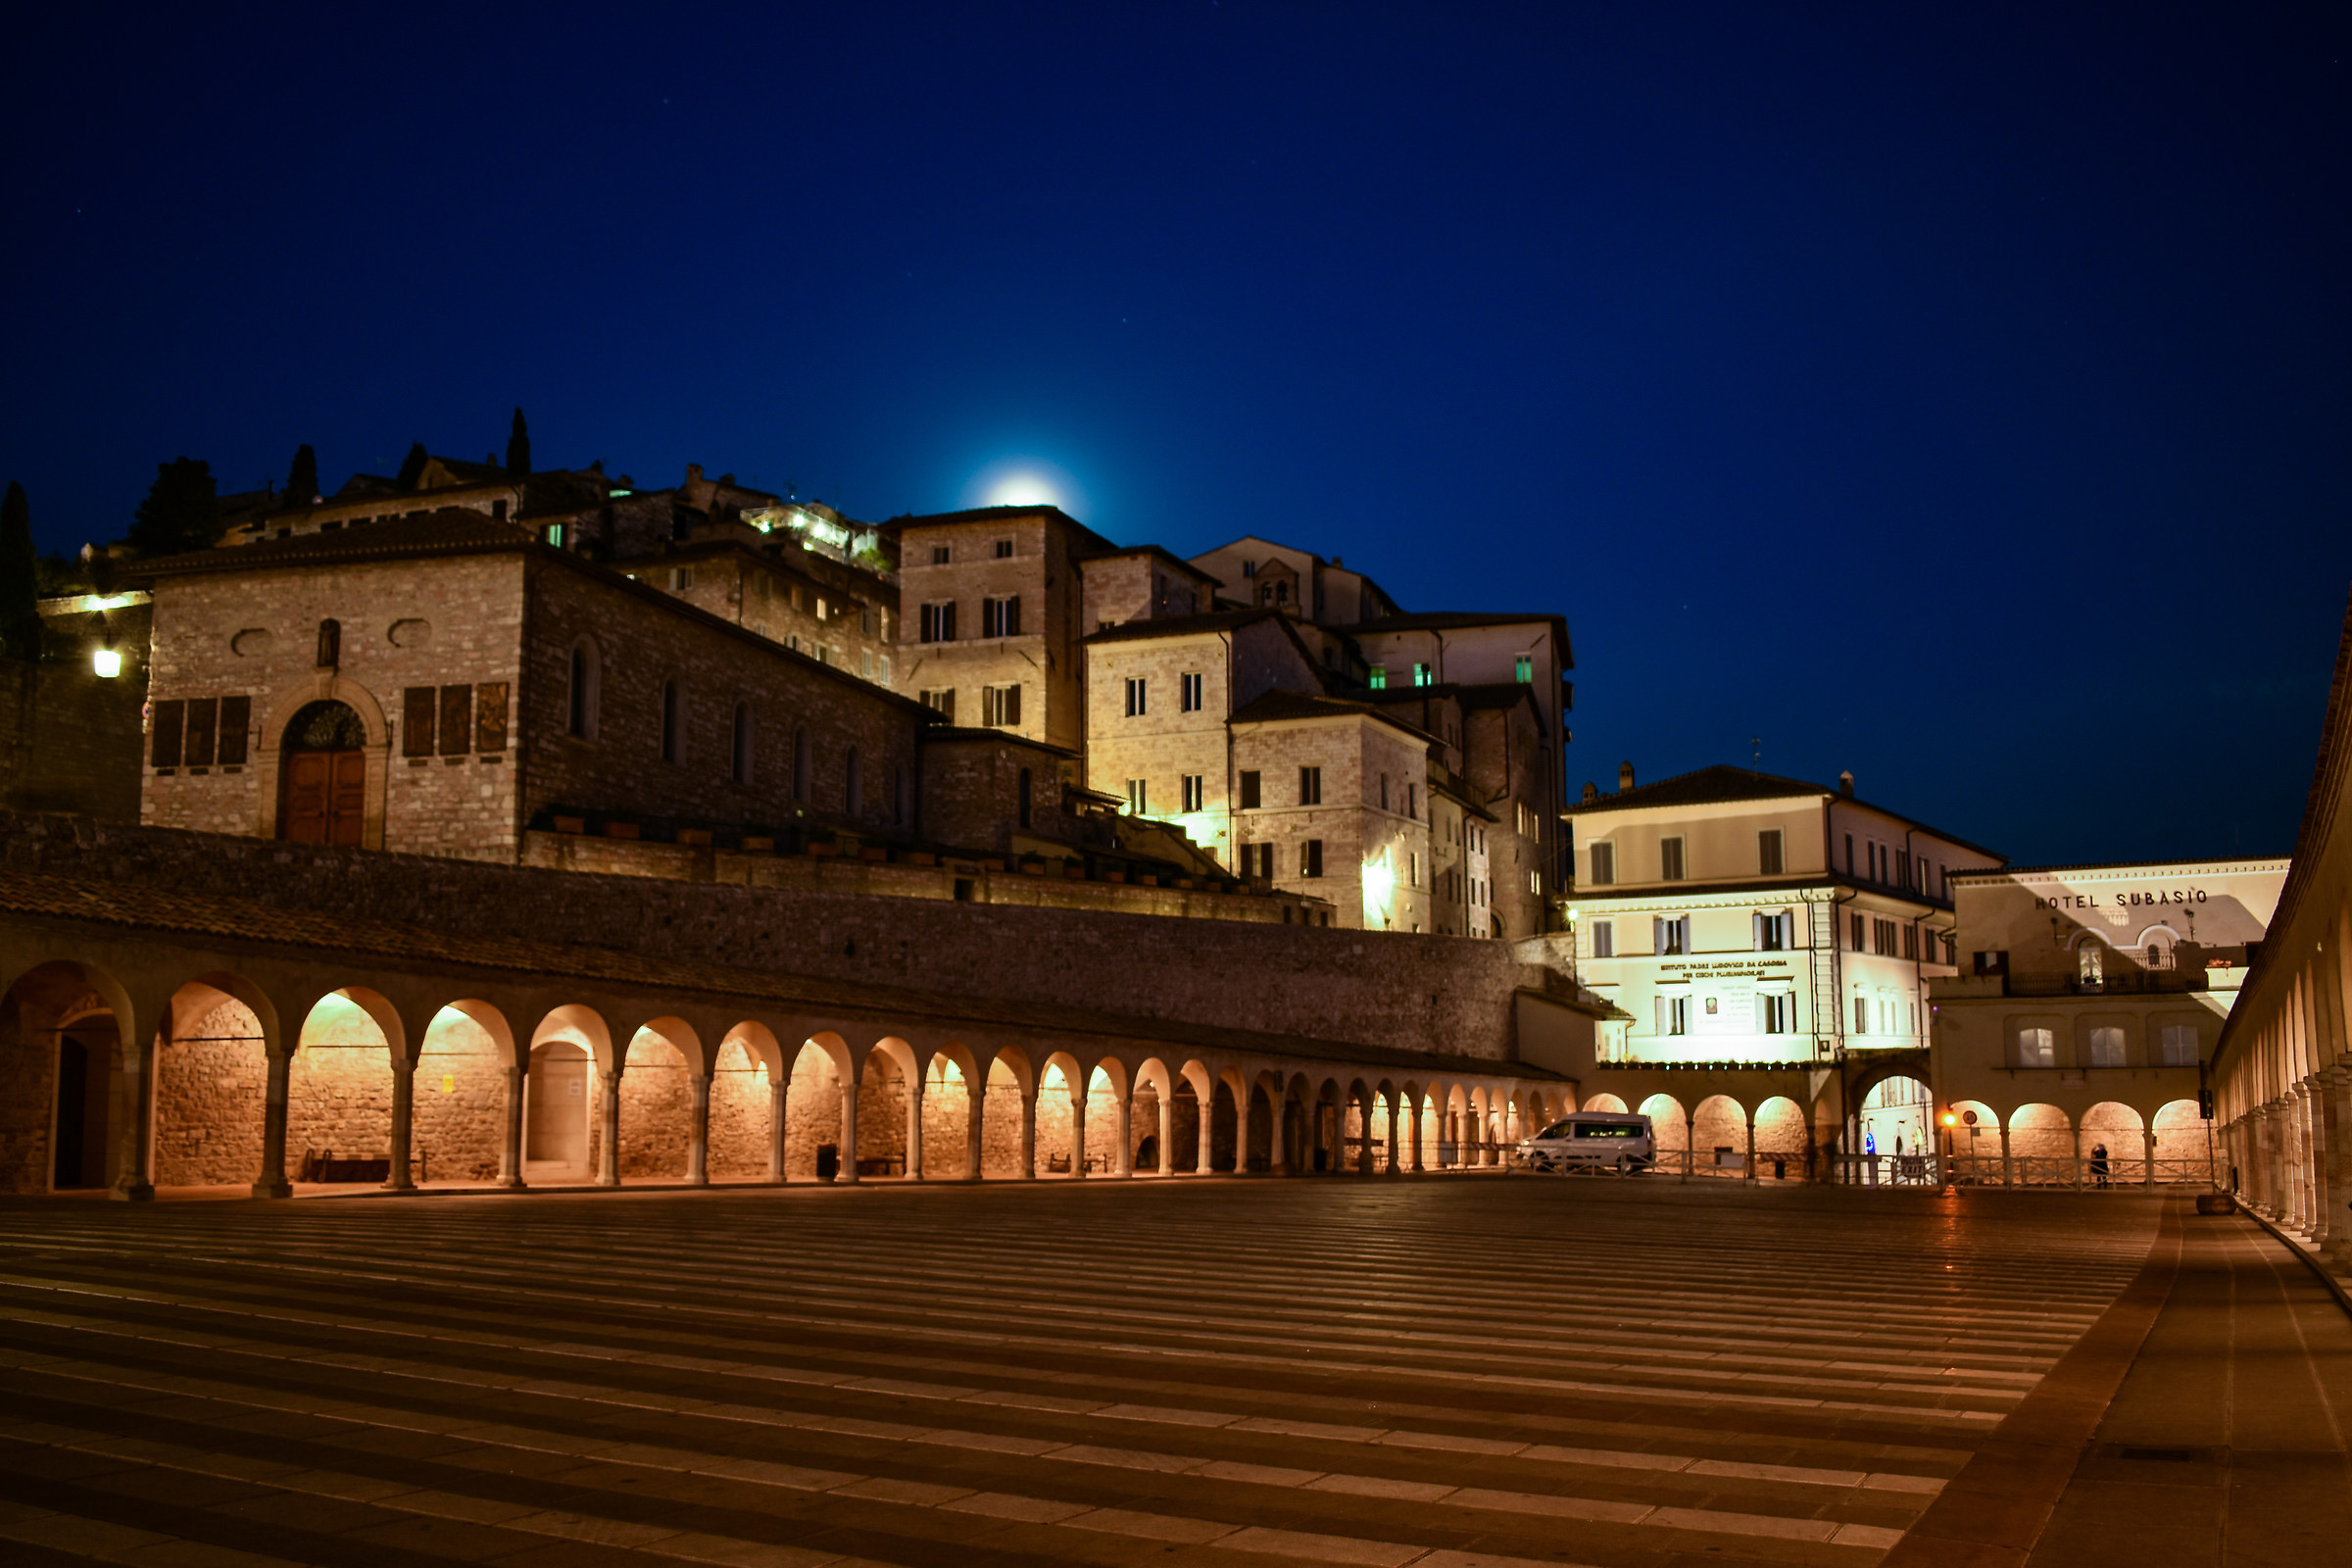 The moon is over Assisi...